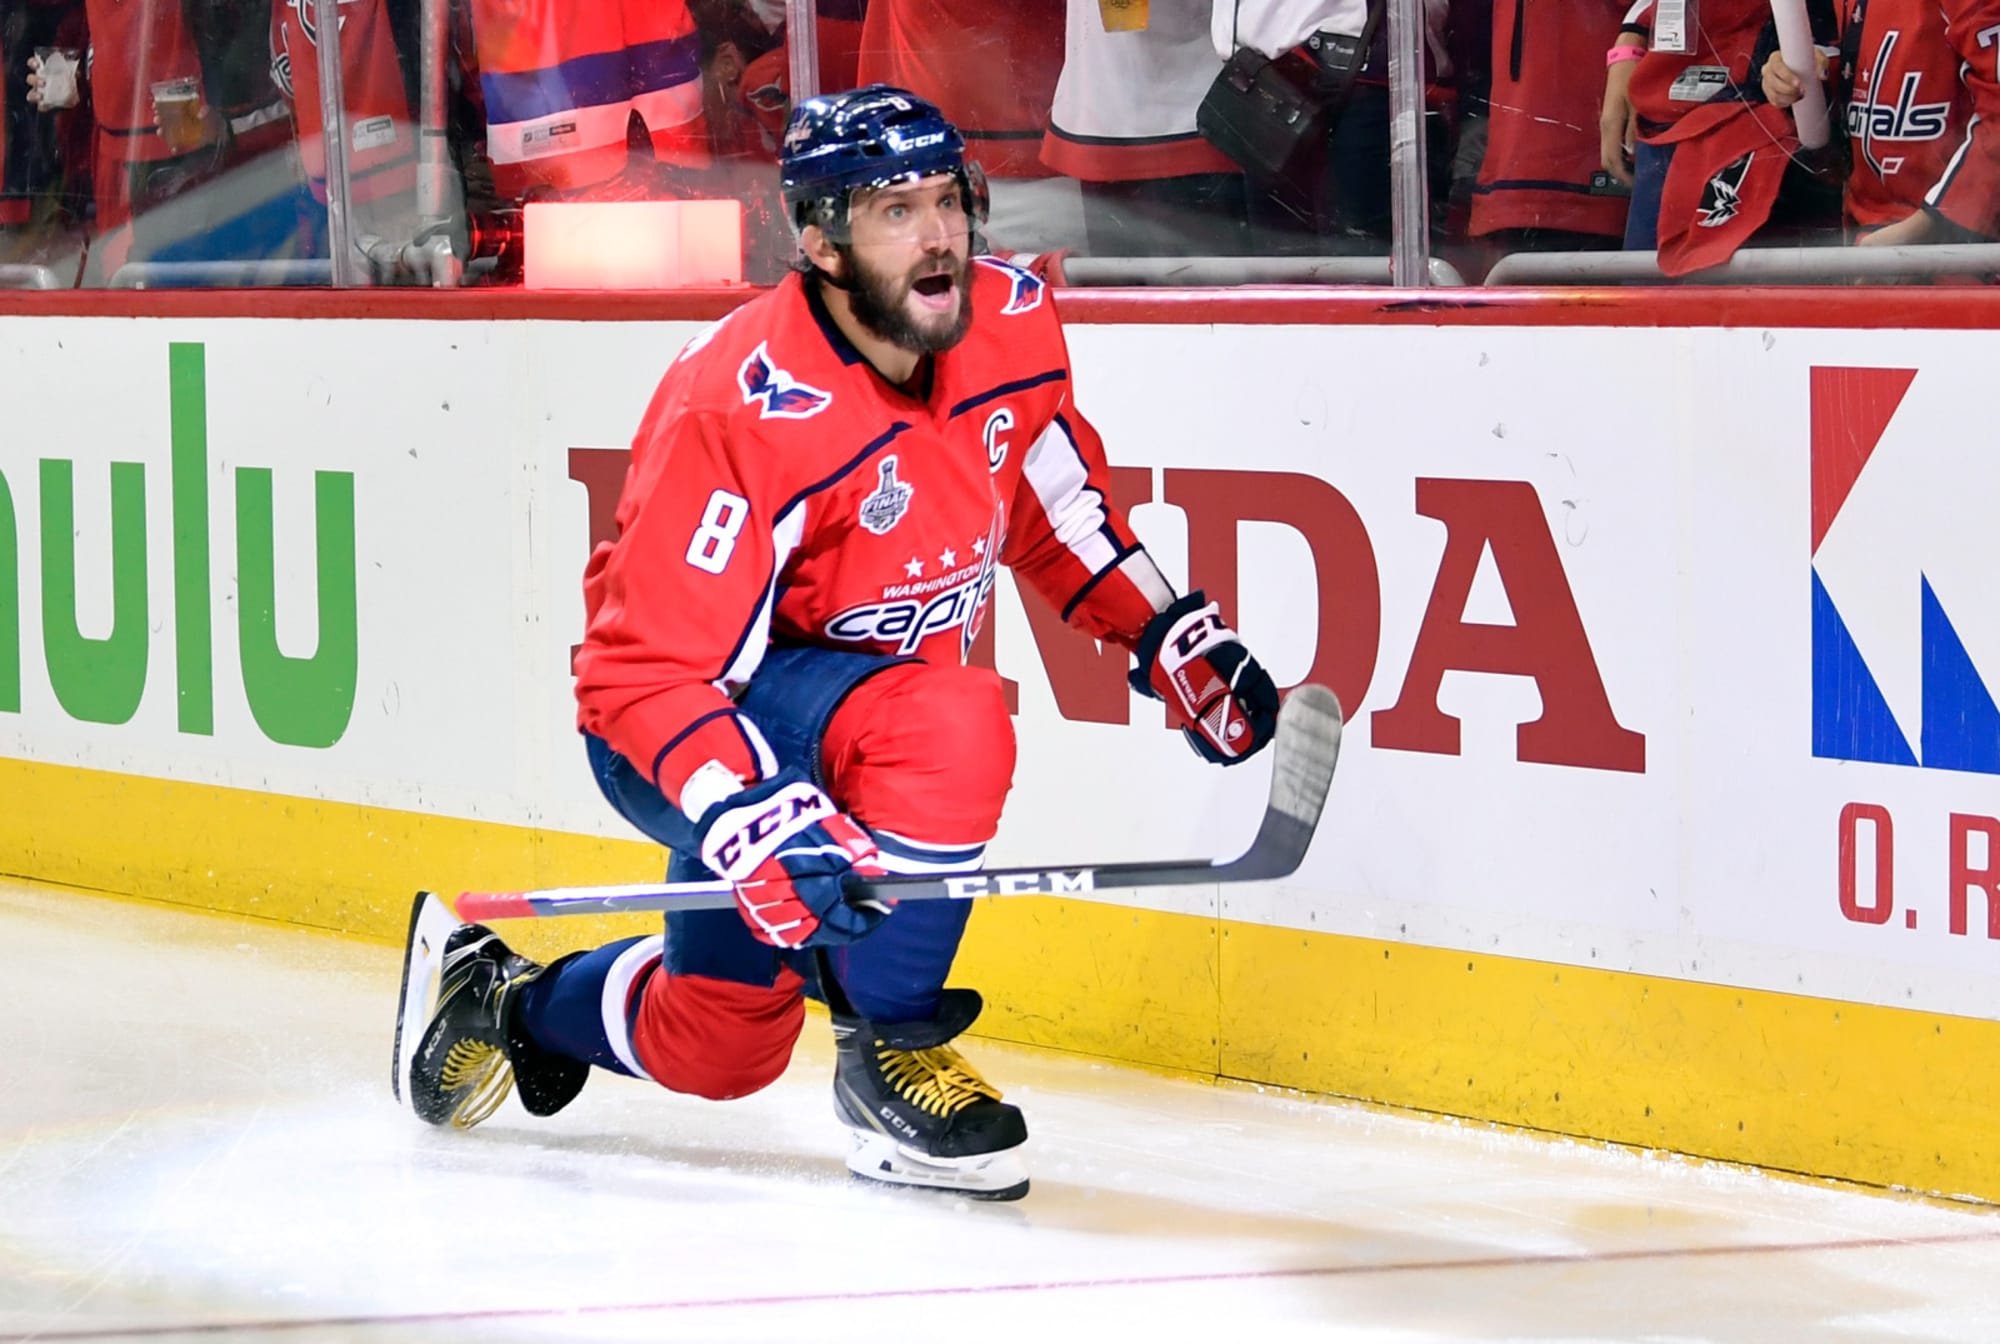 Alex Ovechkin says his main goal is to win another Stanley Cup before his  career ends, not beat Wayne Gretzky's goals record